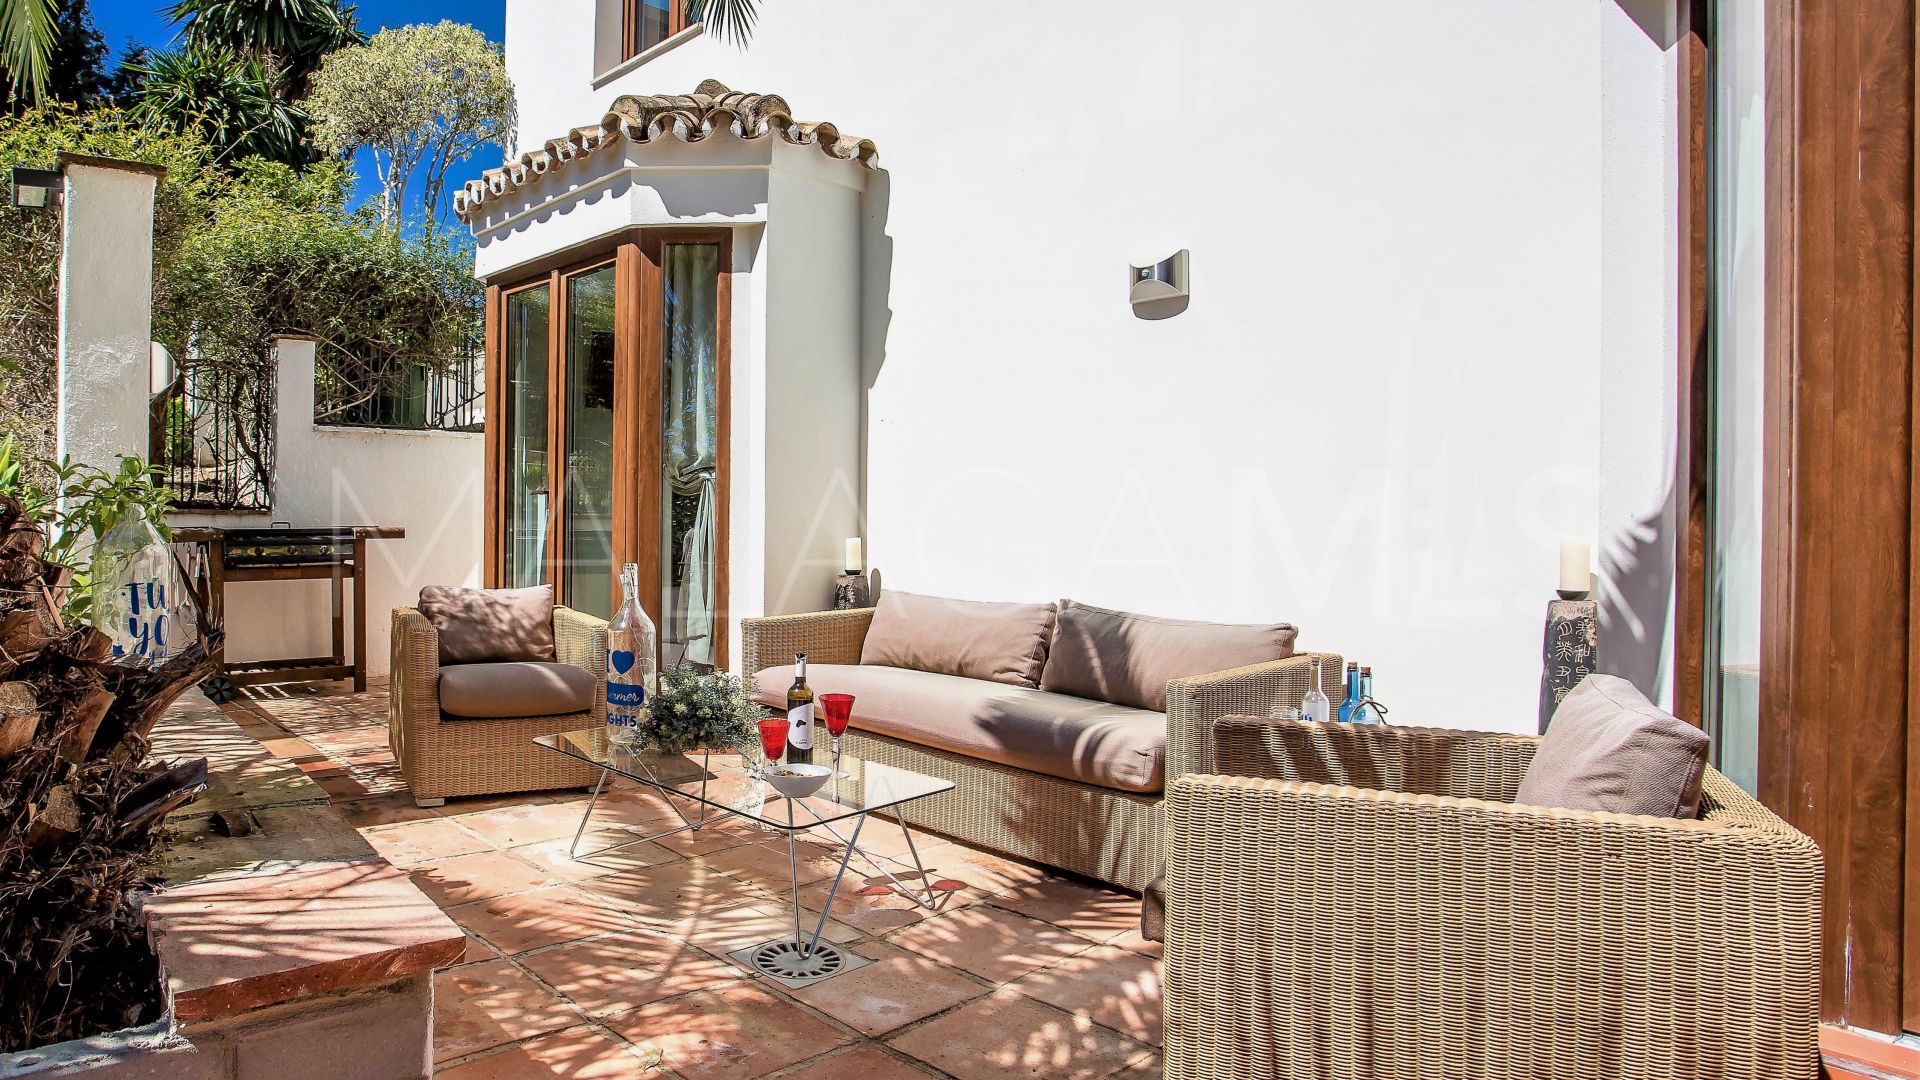 Villa for sale with 8 bedrooms in San Pedro Playa